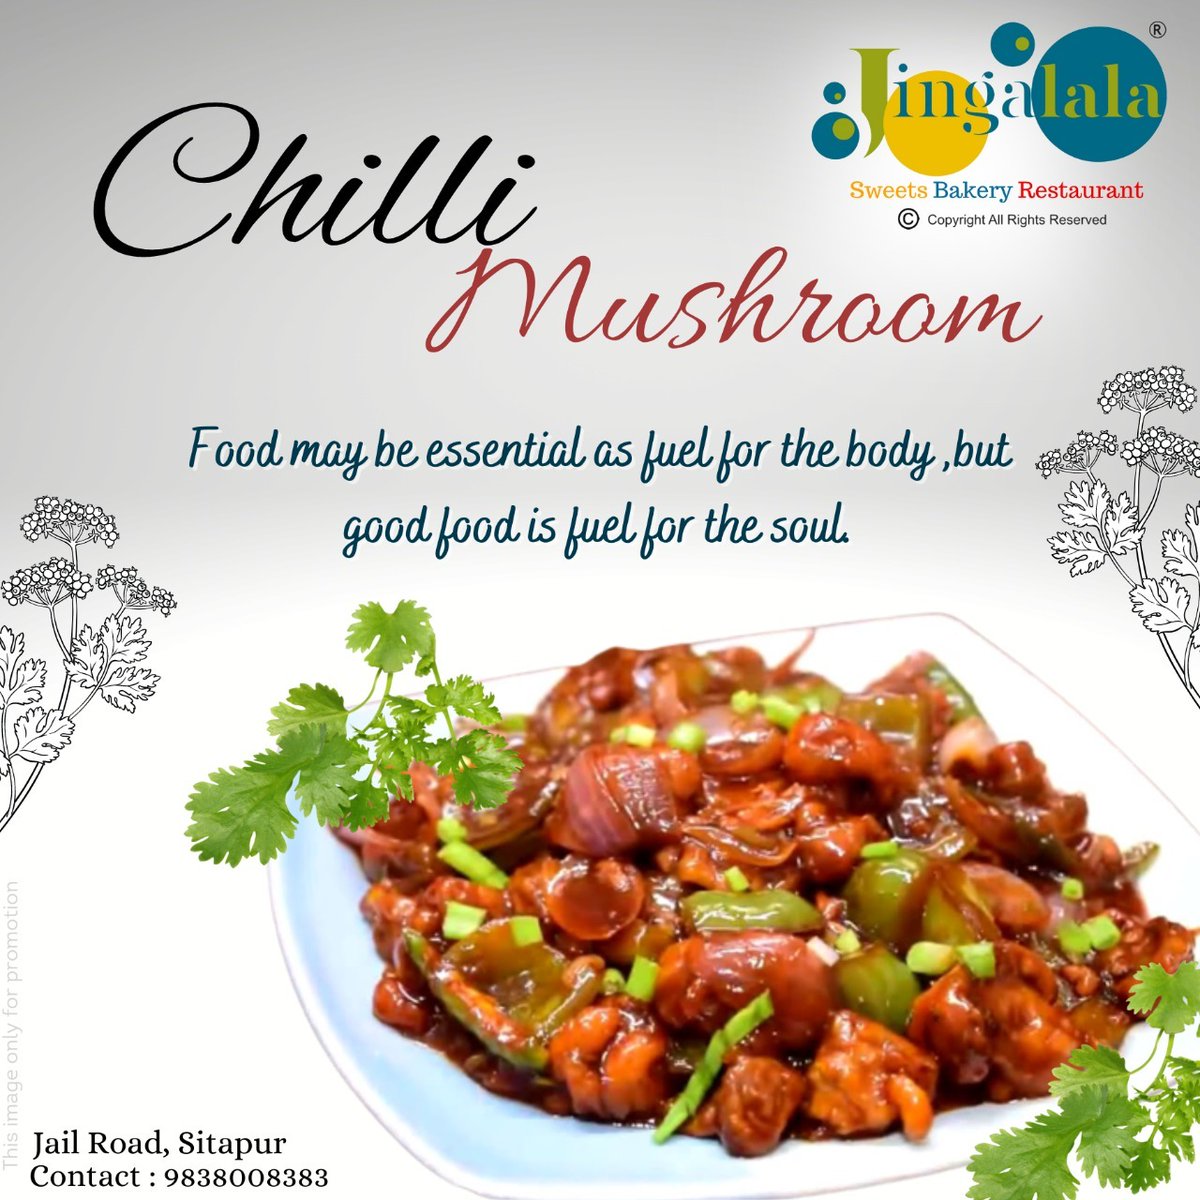 Food may be essential as fuel for the body, but good food is fuel for the soul....🤩
CHILLI MUSHROOM😋
.
.
Jingalala sweets and Restaurant
Contact 9838008383 
ADD- Jail Road, Sitapur 
.
.
.
#chillypaneer #chinesefood #paneer #FruitChaat #Fruits #food #Sitapur #paneertikka